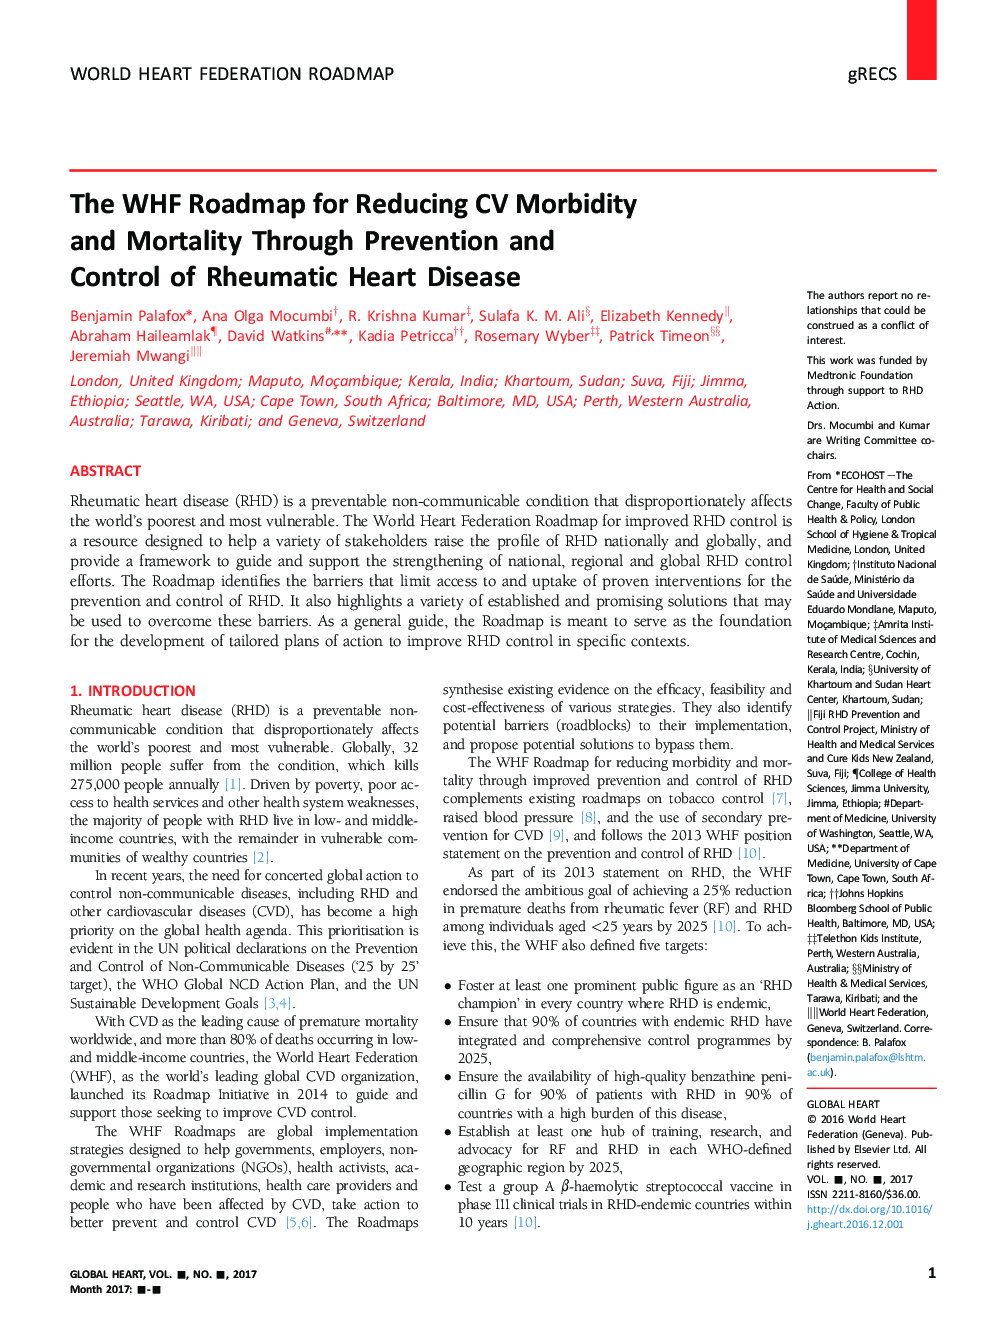 The WHF Roadmap for Reducing CV Morbidity and Mortality Through Prevention and Control of RHD